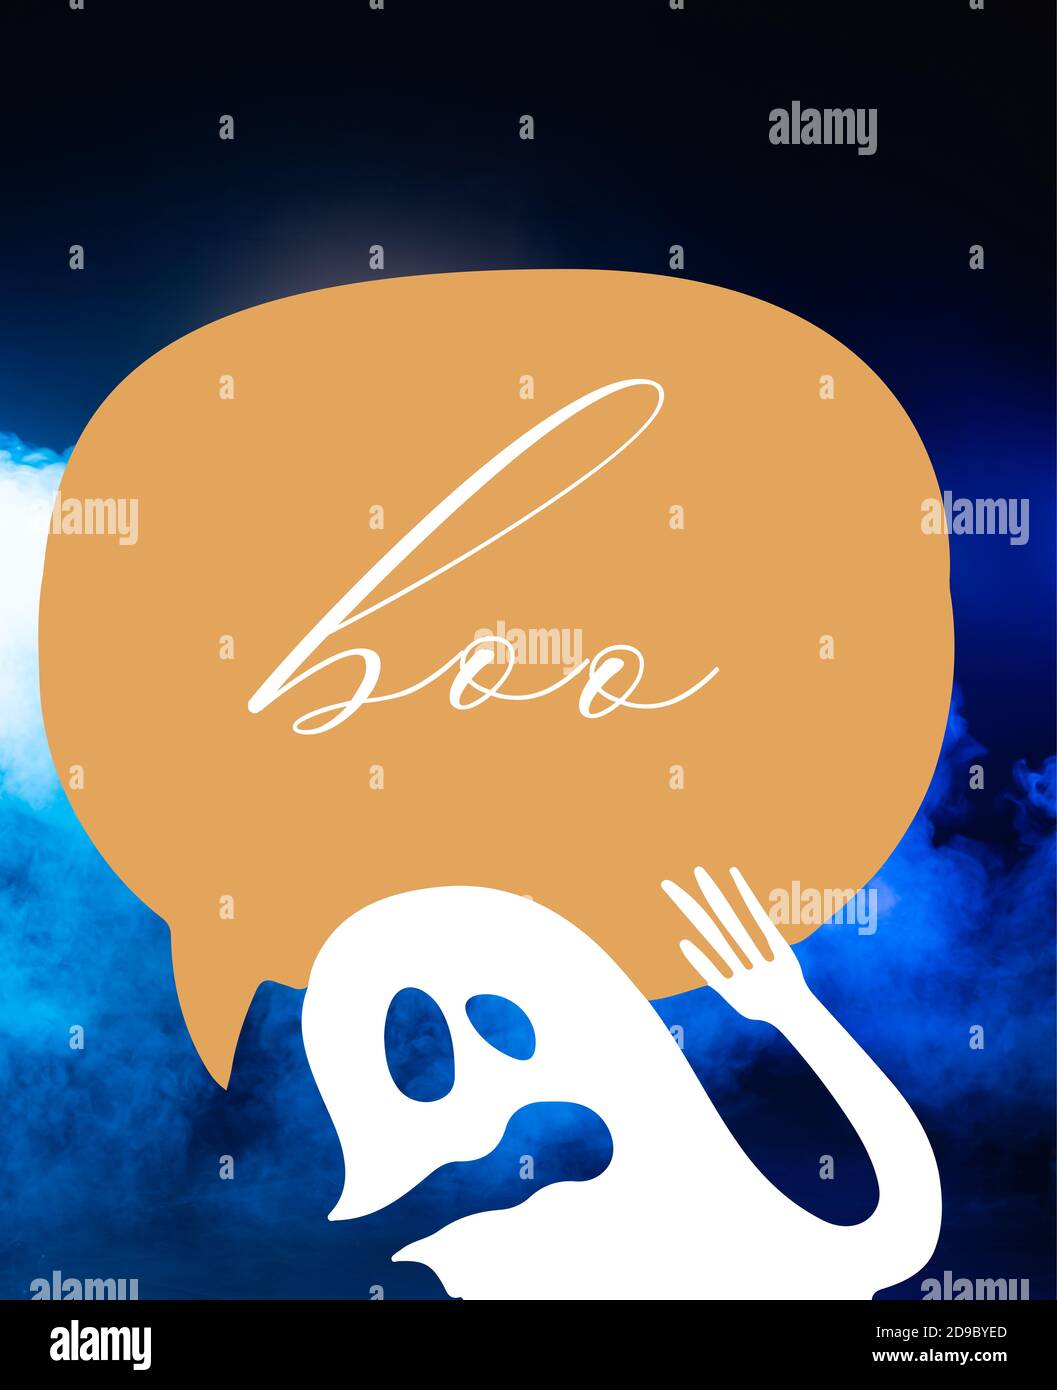 speech bubble with boo lettering and ghost illustration on dark blue background Stock Photo